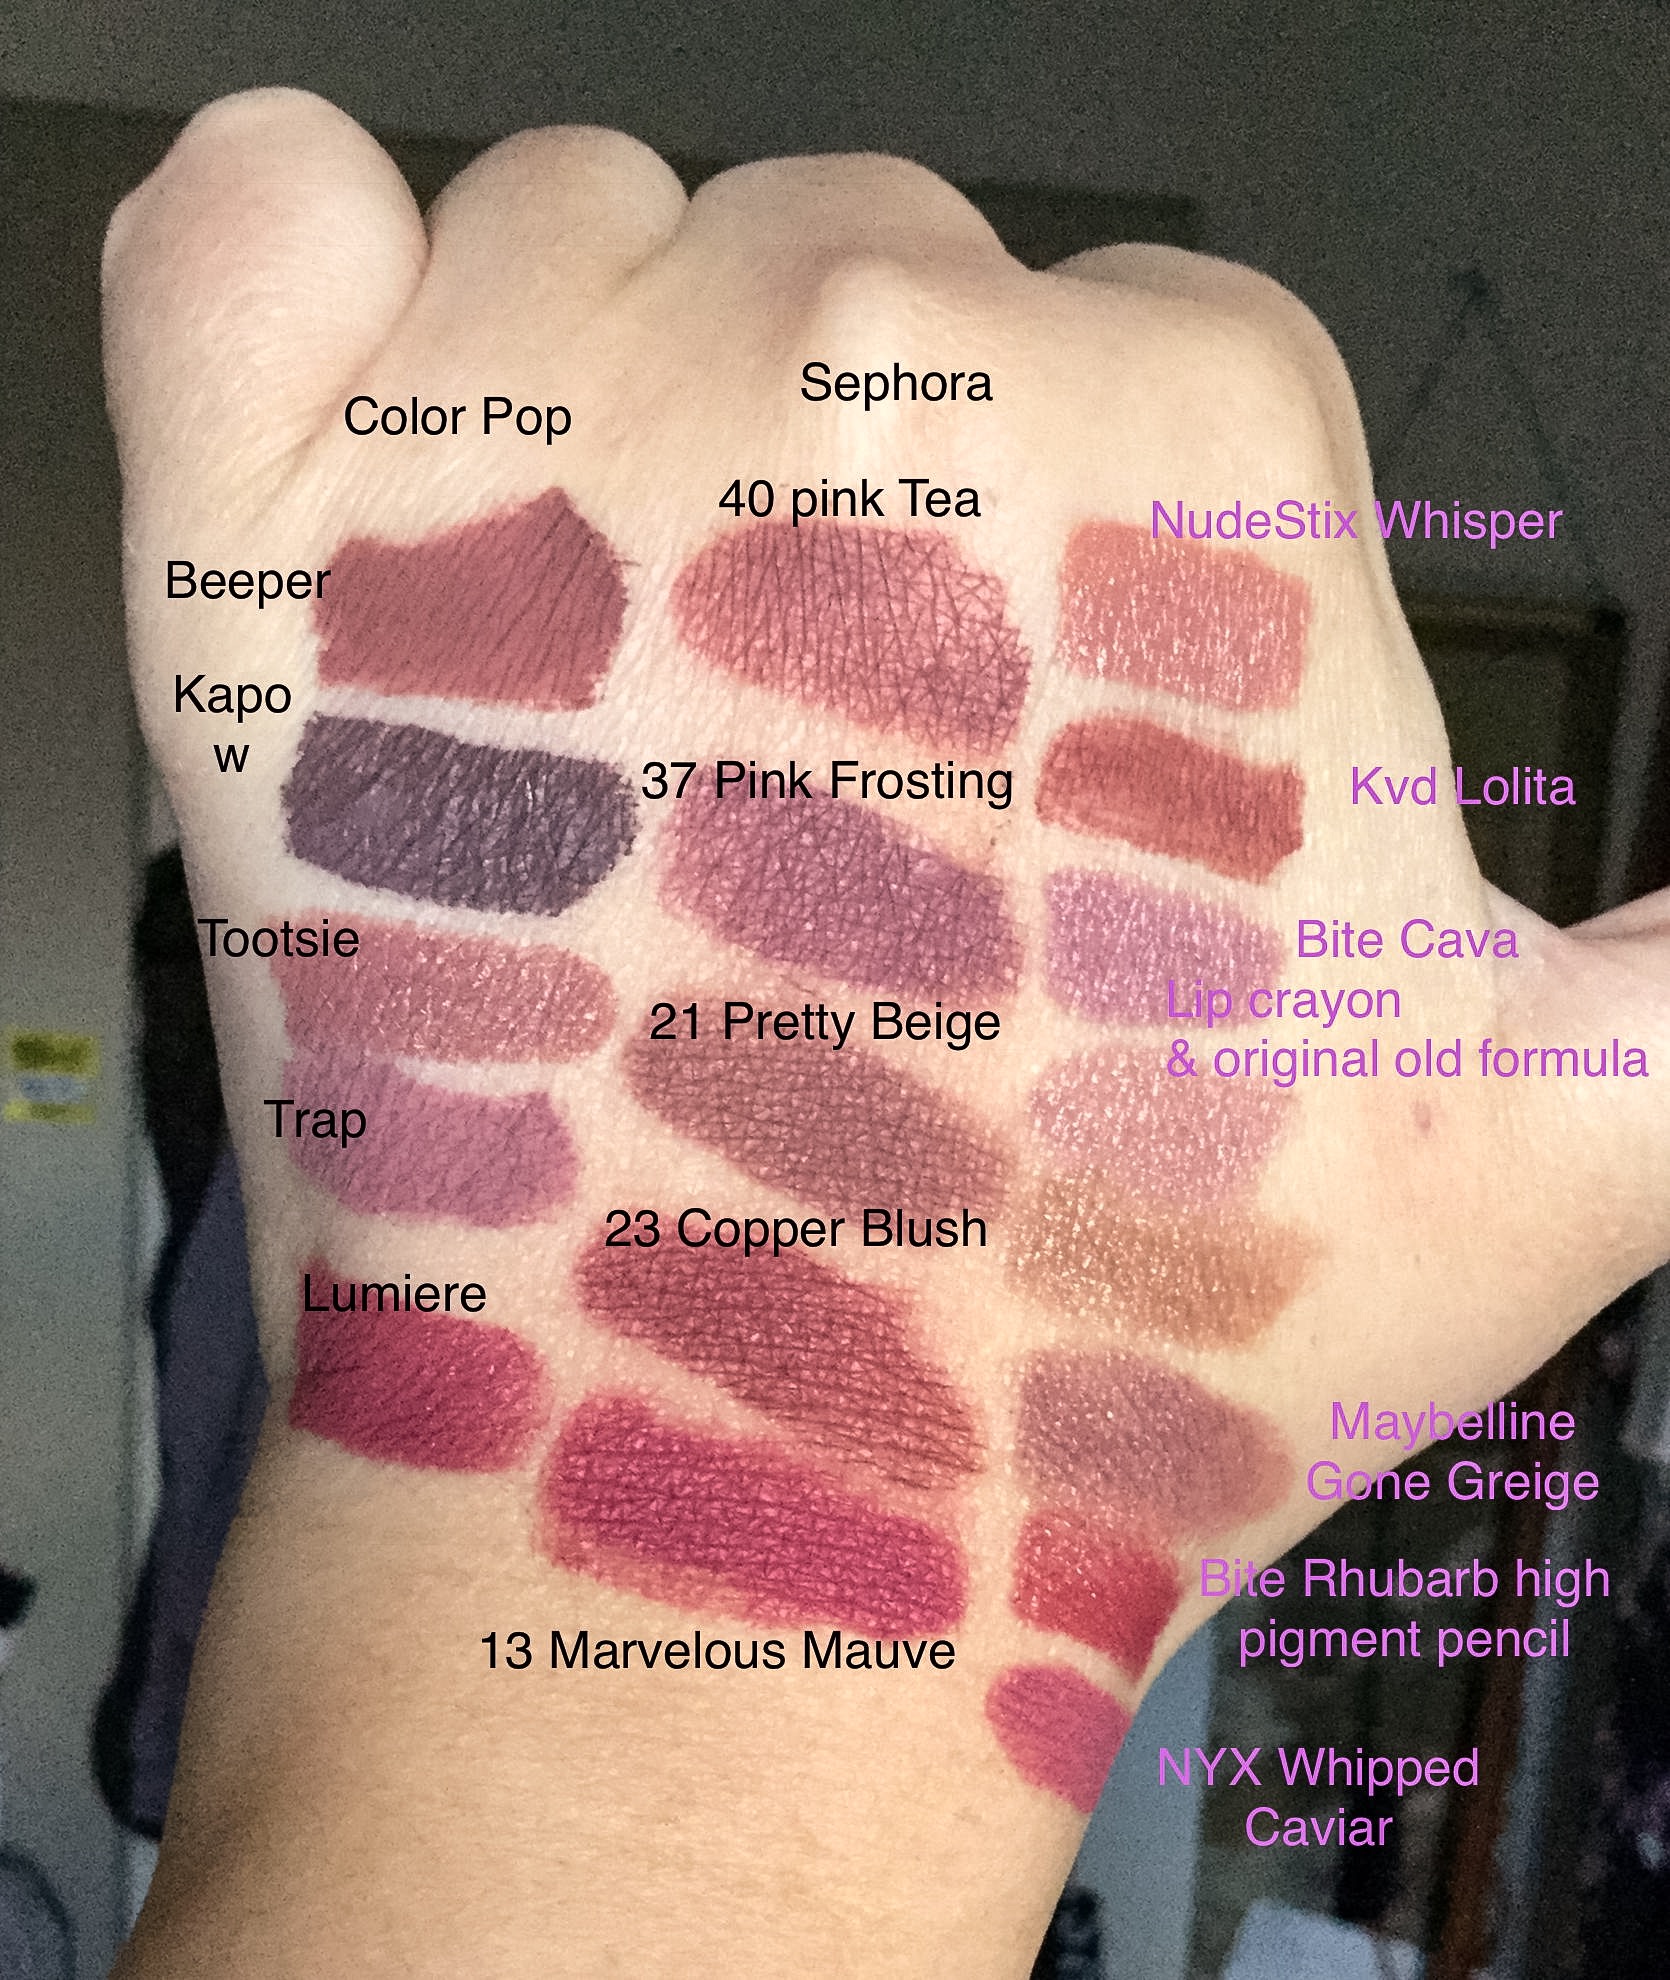 Re: THE SWATCH REQUEST THREAD ! - Page 192 - Beauty Insider Community